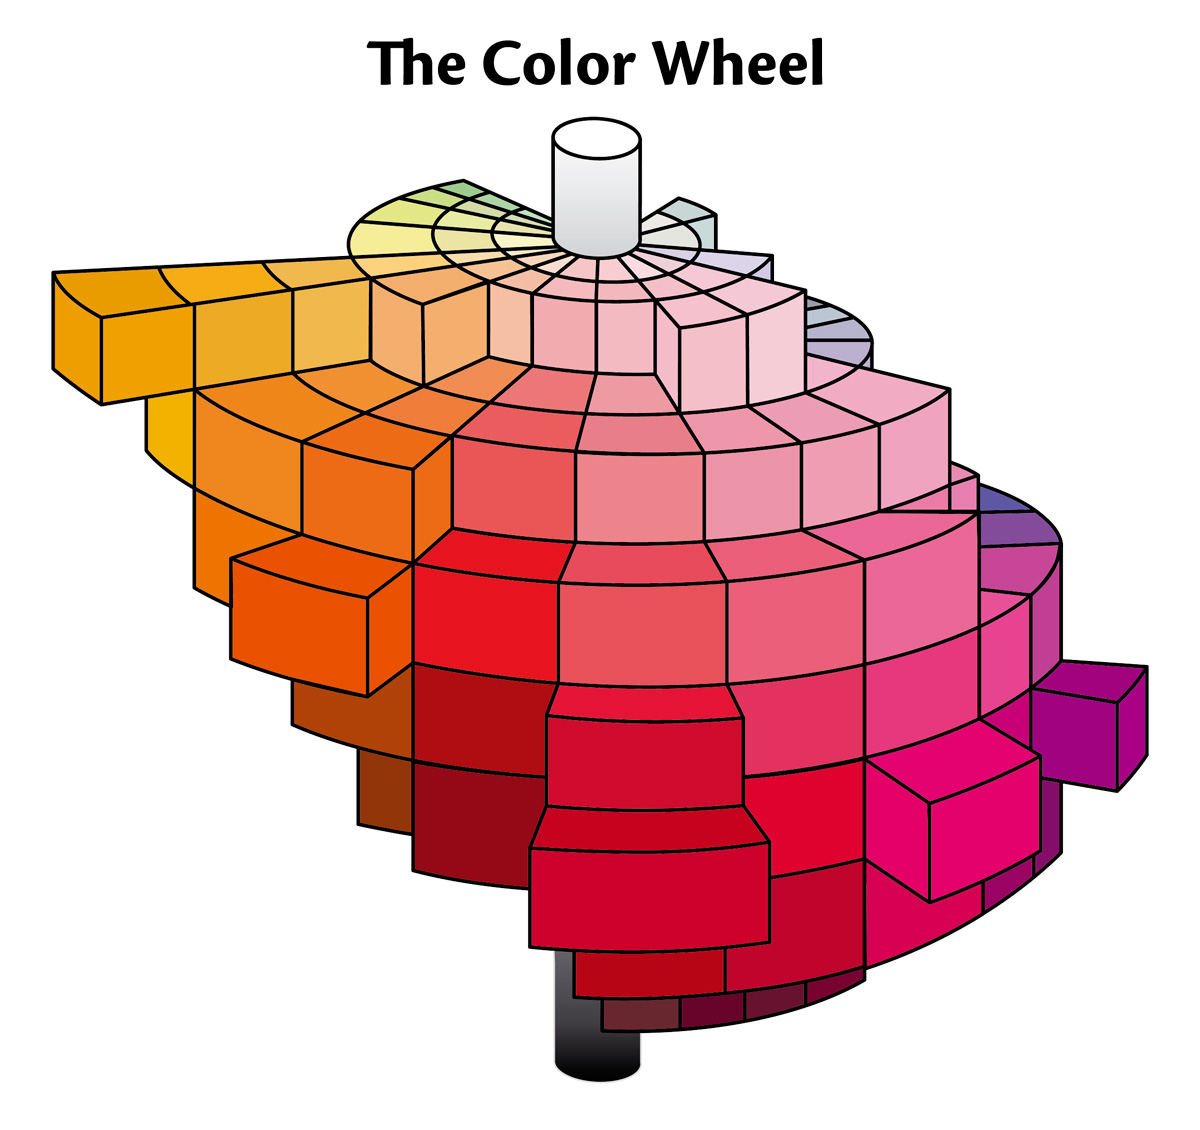 Three-dimensional view of a color solid. Illustration courtesy of Minolta USA